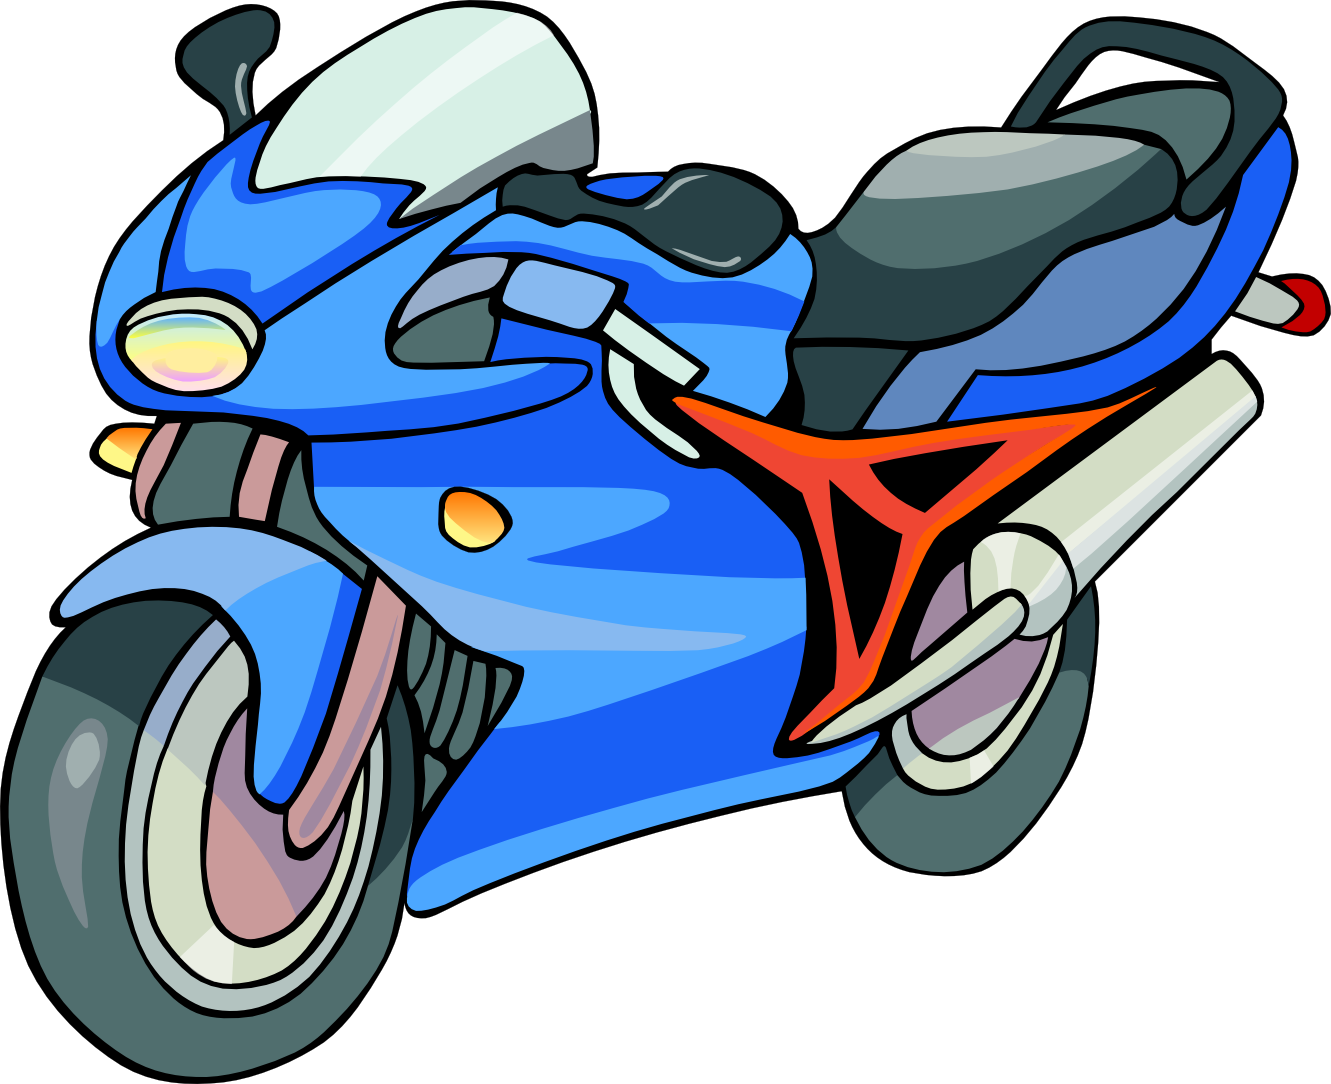 Motorcycle Clip Art Free Printable - Free Clipart ...